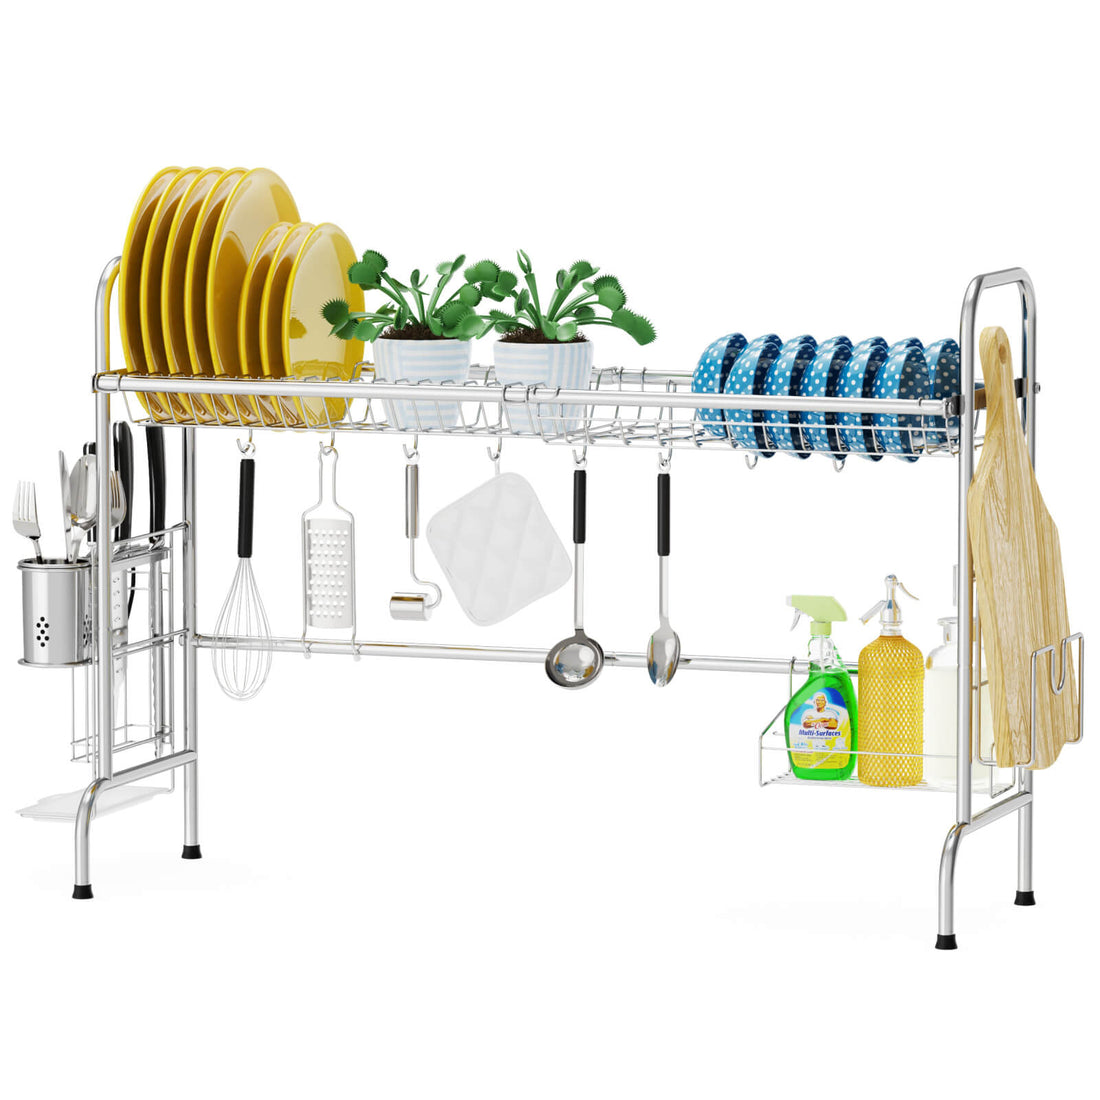  iSpecle Over The Sink Dish Drying Rack